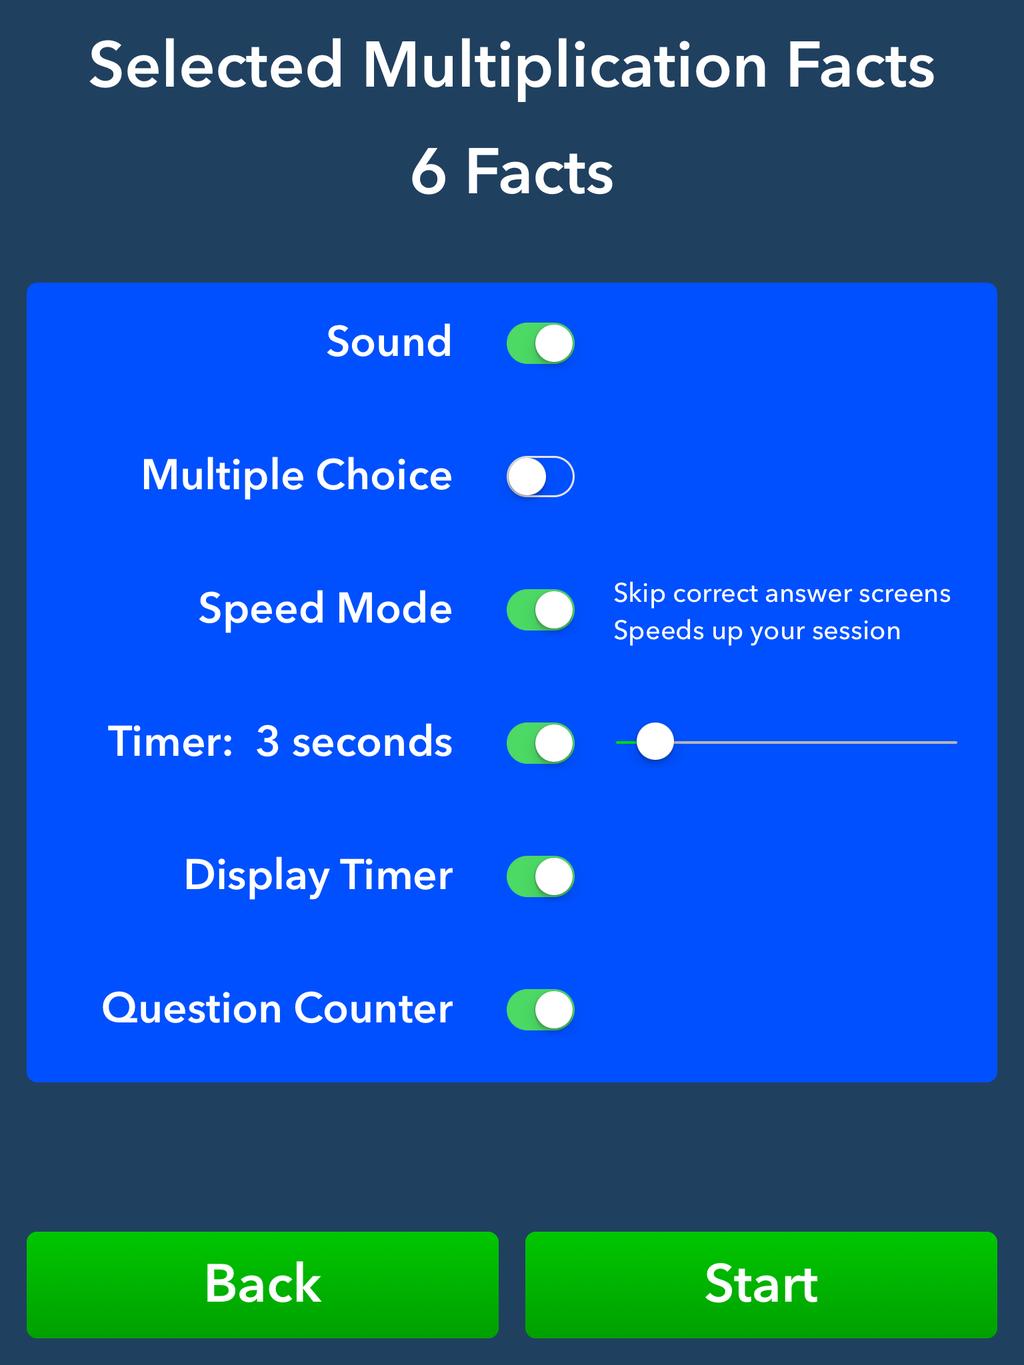 How to Choose Facts to Practice Which facts? If your teacher assigns facts, use those. If not, choose from this list to the right. Do not choose facts that you already know well.